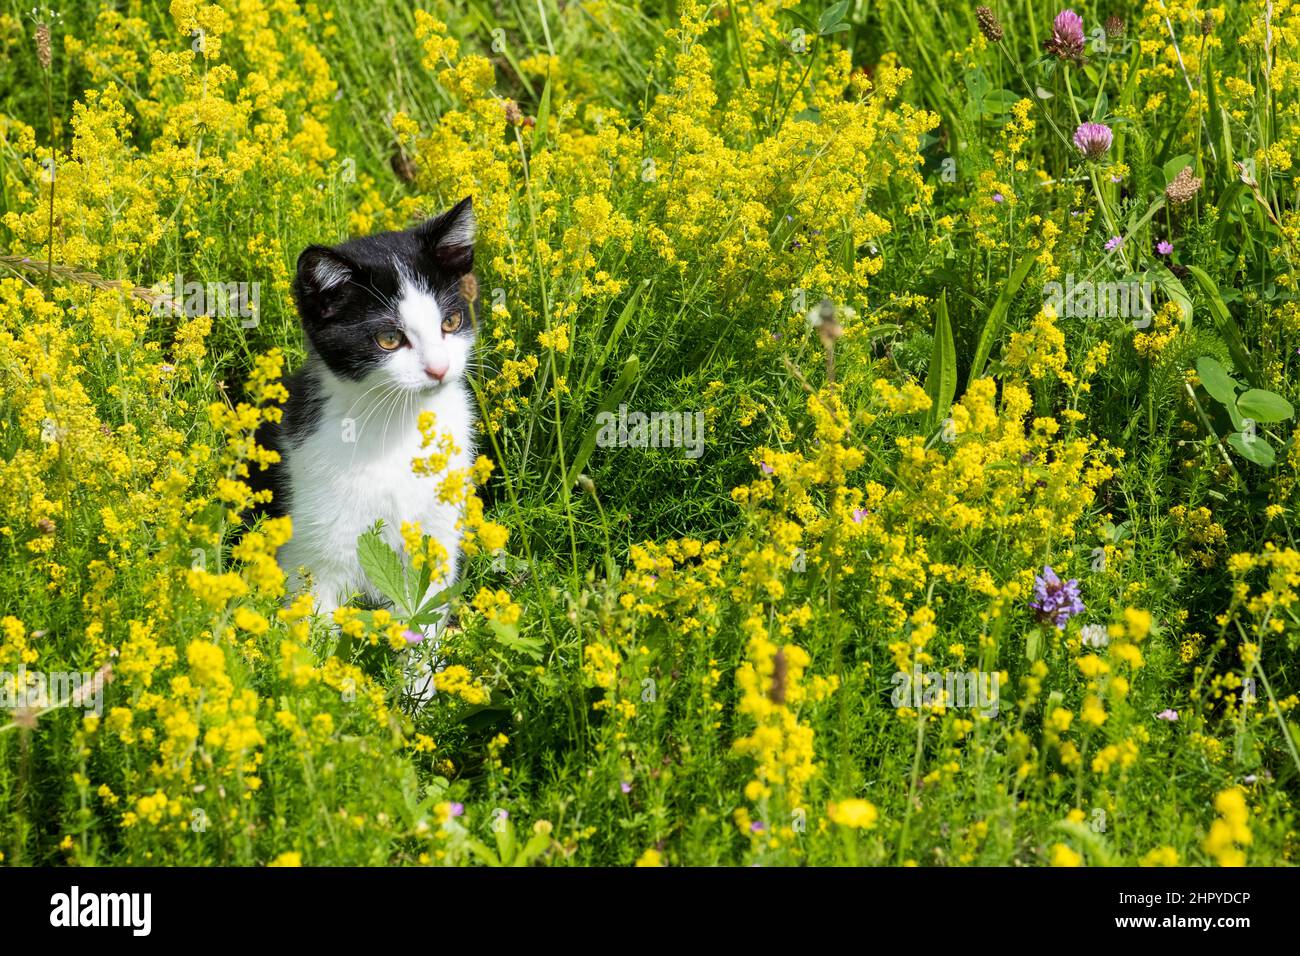 Black and white kitten, European house cat, in a flowery meadow, Lorraine, France Stock Photo